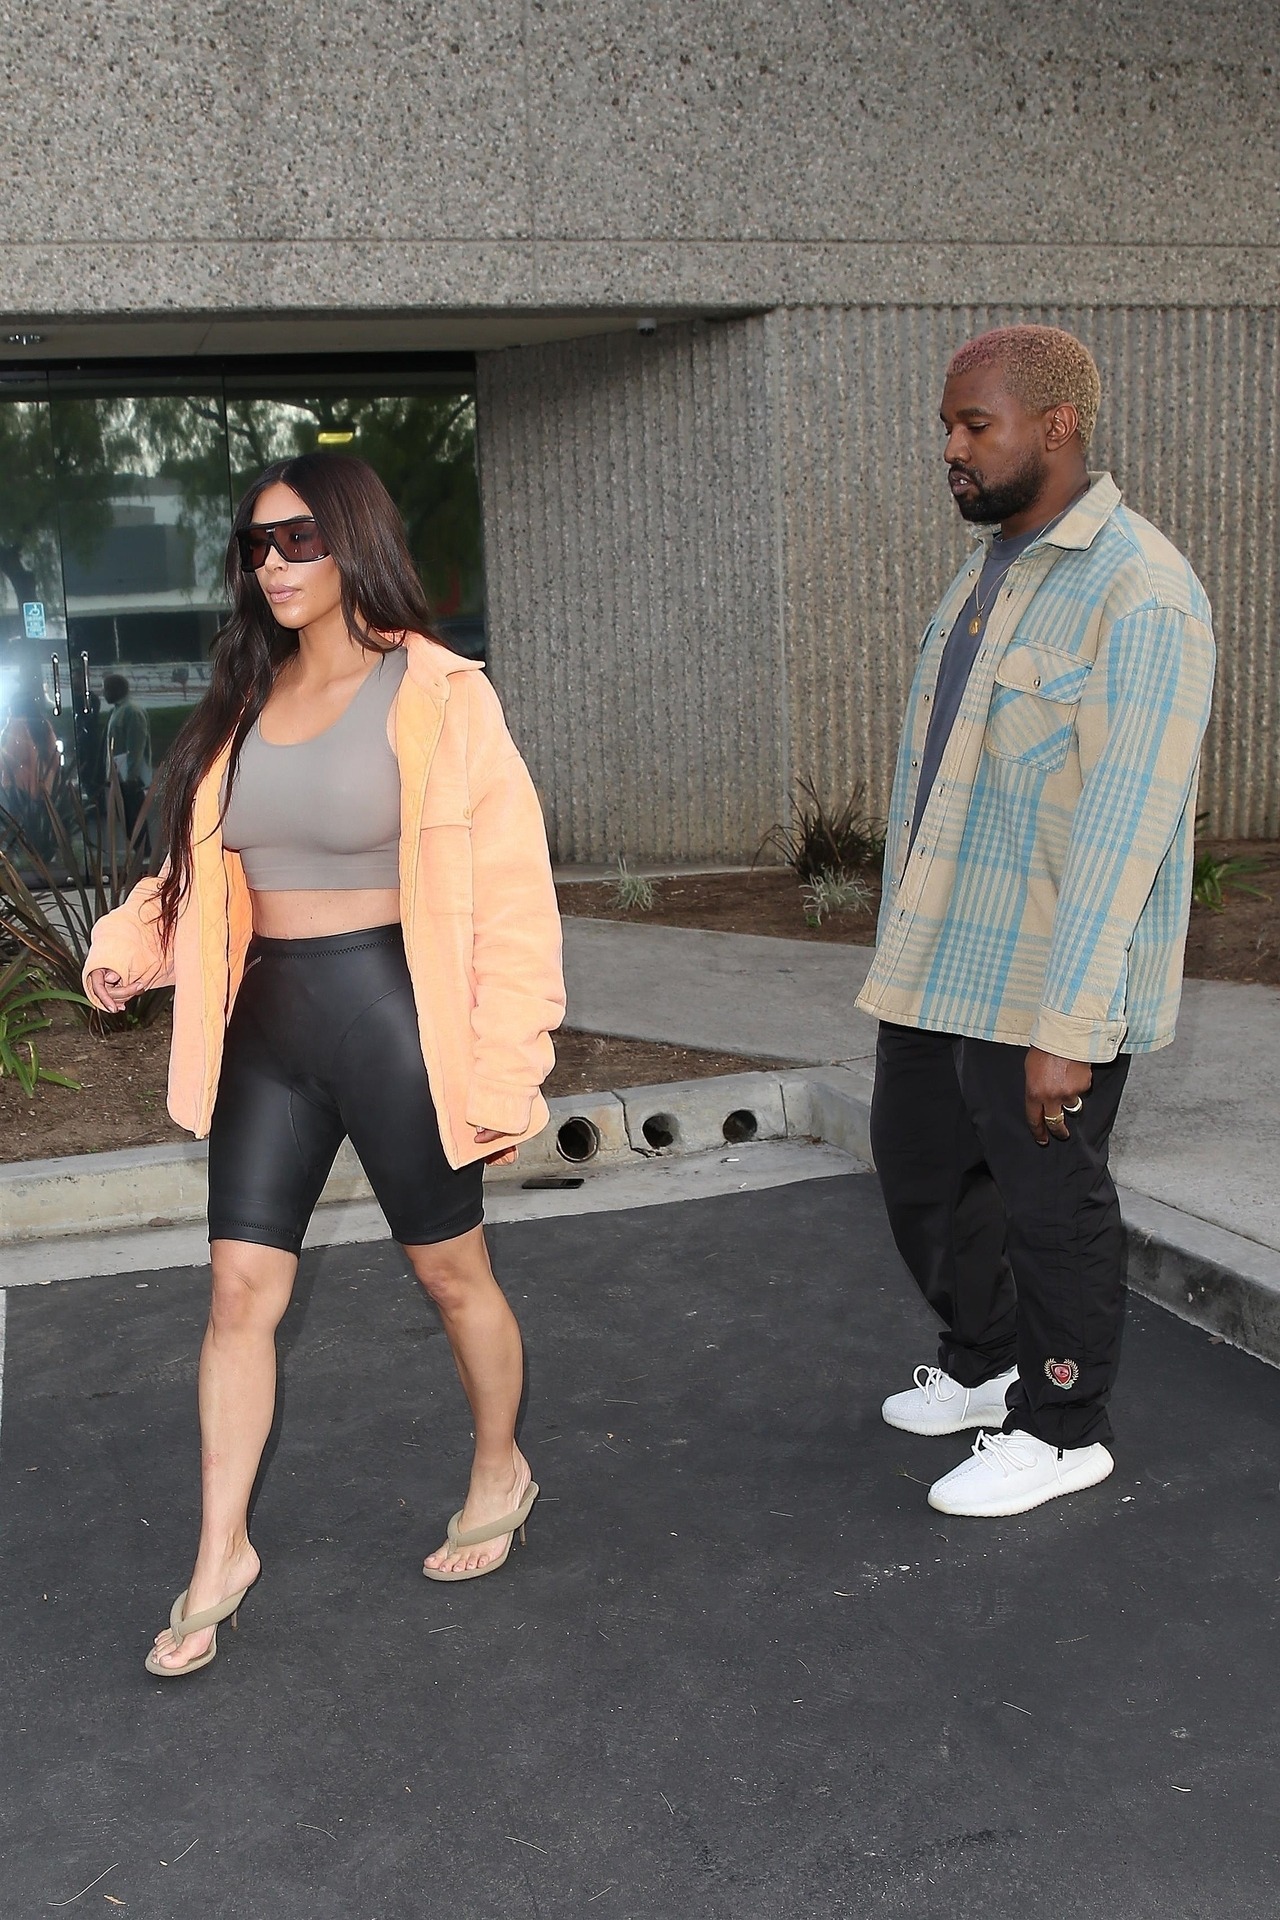 SPOTTED: Kanye West Returns to Calabasas